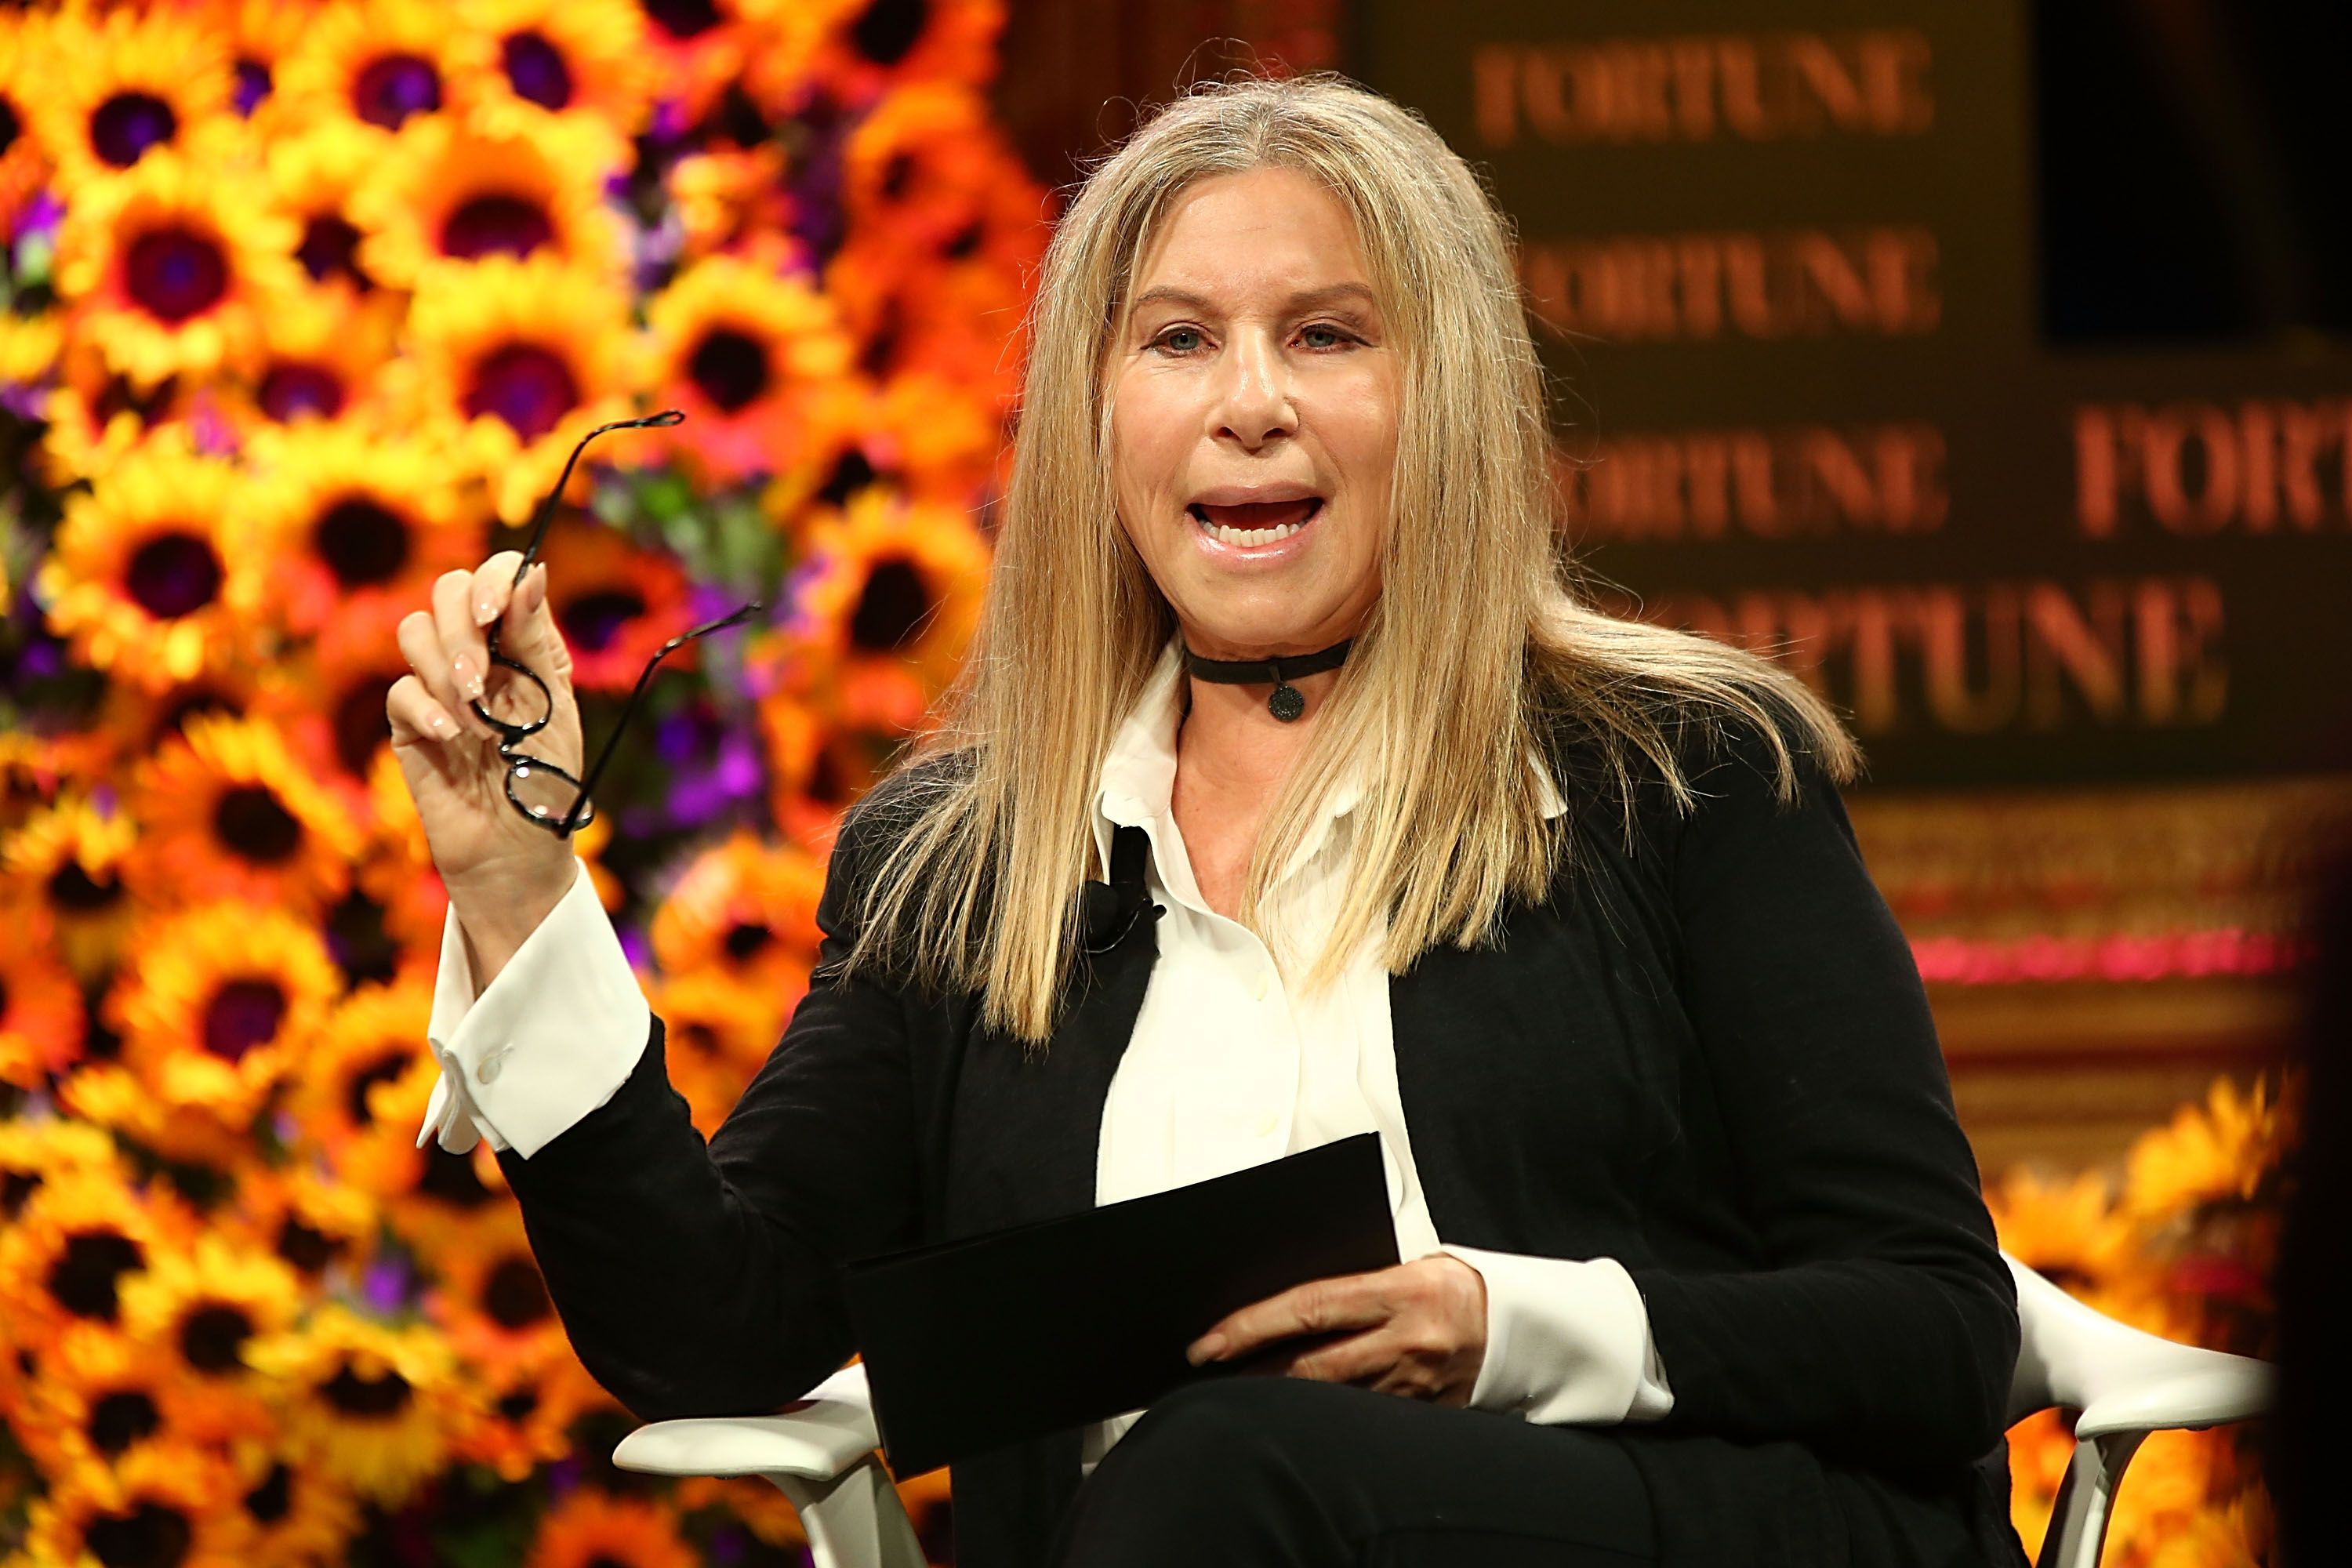 Barbara Streisand speaks onstage at the Fortune Most Powerful Woman Summit on October 18, 2016 in Dana Point, California | Source: Getty Images 